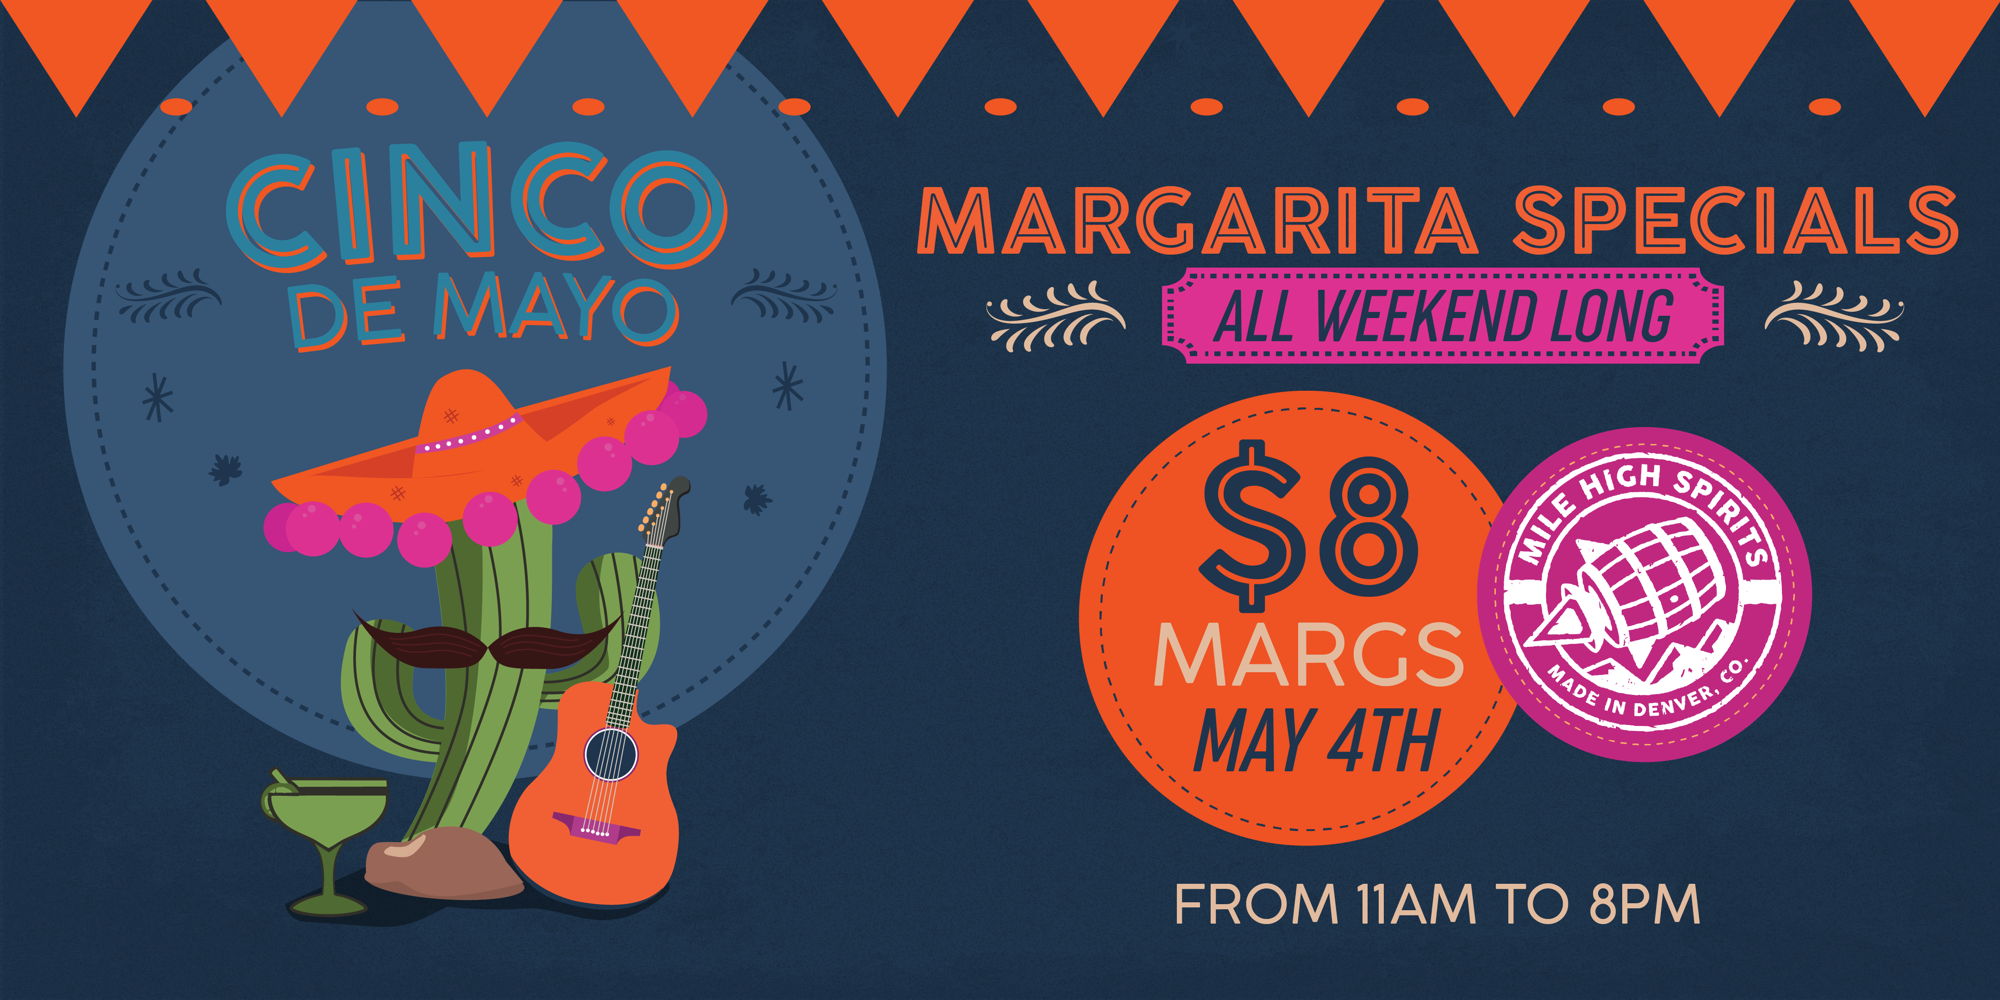 $8 Margs at Mile High Spirits - Cinco de Mayo promotional image